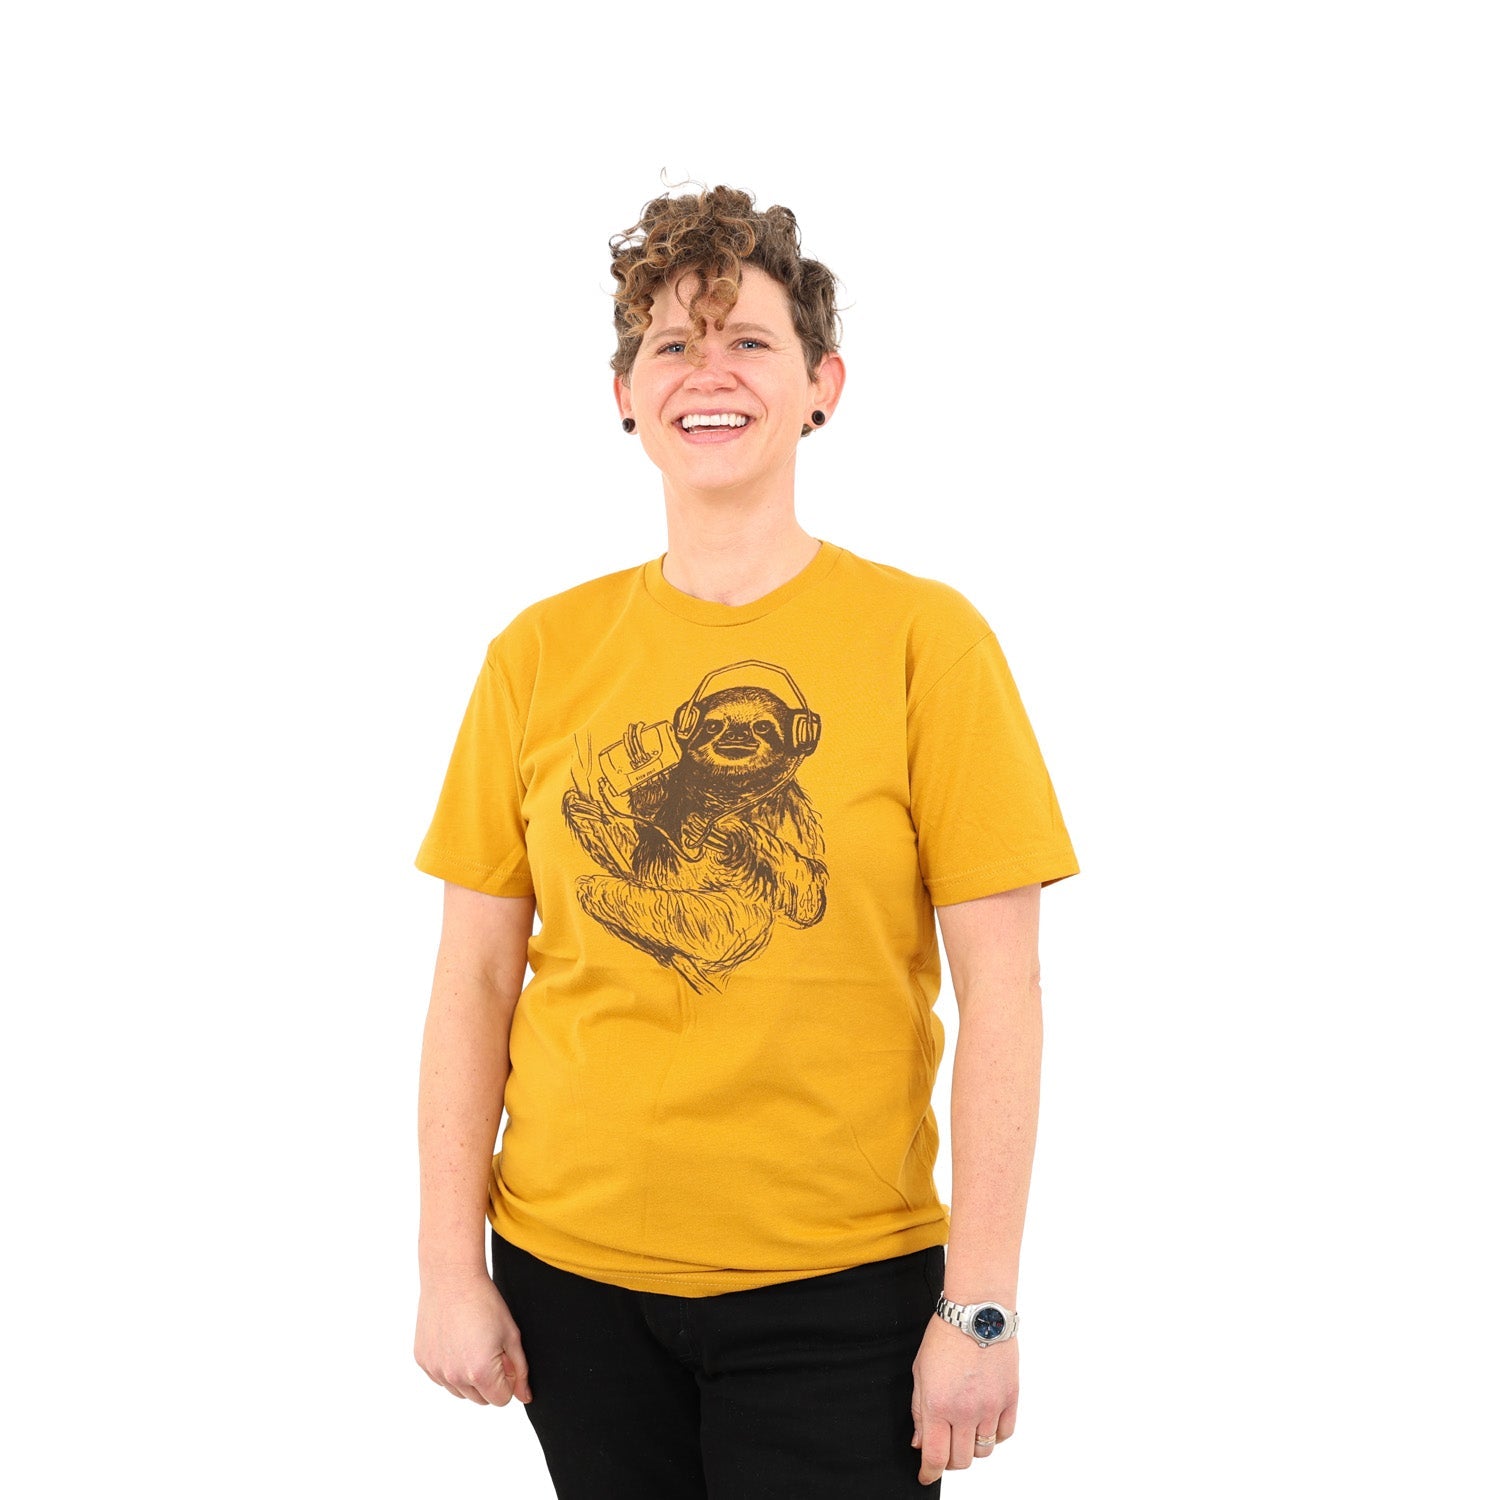 girl with awesome curly hair wearing a mustard yellow tee shirt with a sloth on it wearing headphones listening to music